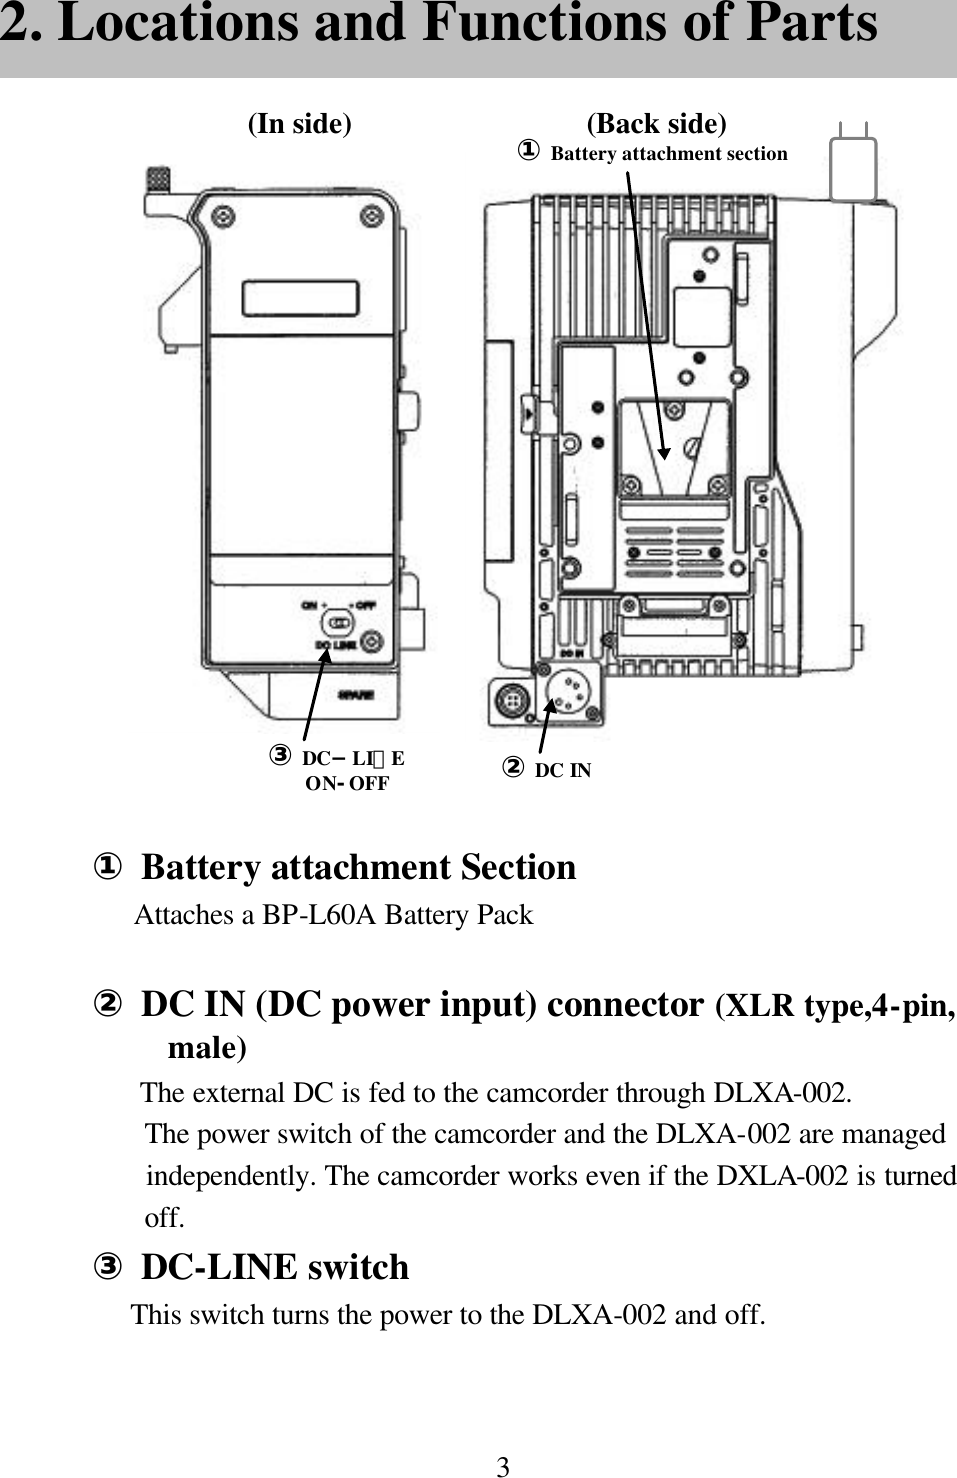 3③DC−LIＮEON‐OFF ②DC IN①Battery attachment section①Battery attachment Section  Attaches a BP-L60A Battery Pack②DC IN (DC power input) connector (XLR type,4-pin, male)   The external DC is fed to the camcorder through DLXA-002.The power switch of the camcorder and the DLXA-002 are managedindependently. The camcorder works even if the DXLA-002 is turnedoff.③DC-LINE switchThis switch turns the power to the DLXA-002 and off. (In side) (Back side)2. Locations and Functions of Parts